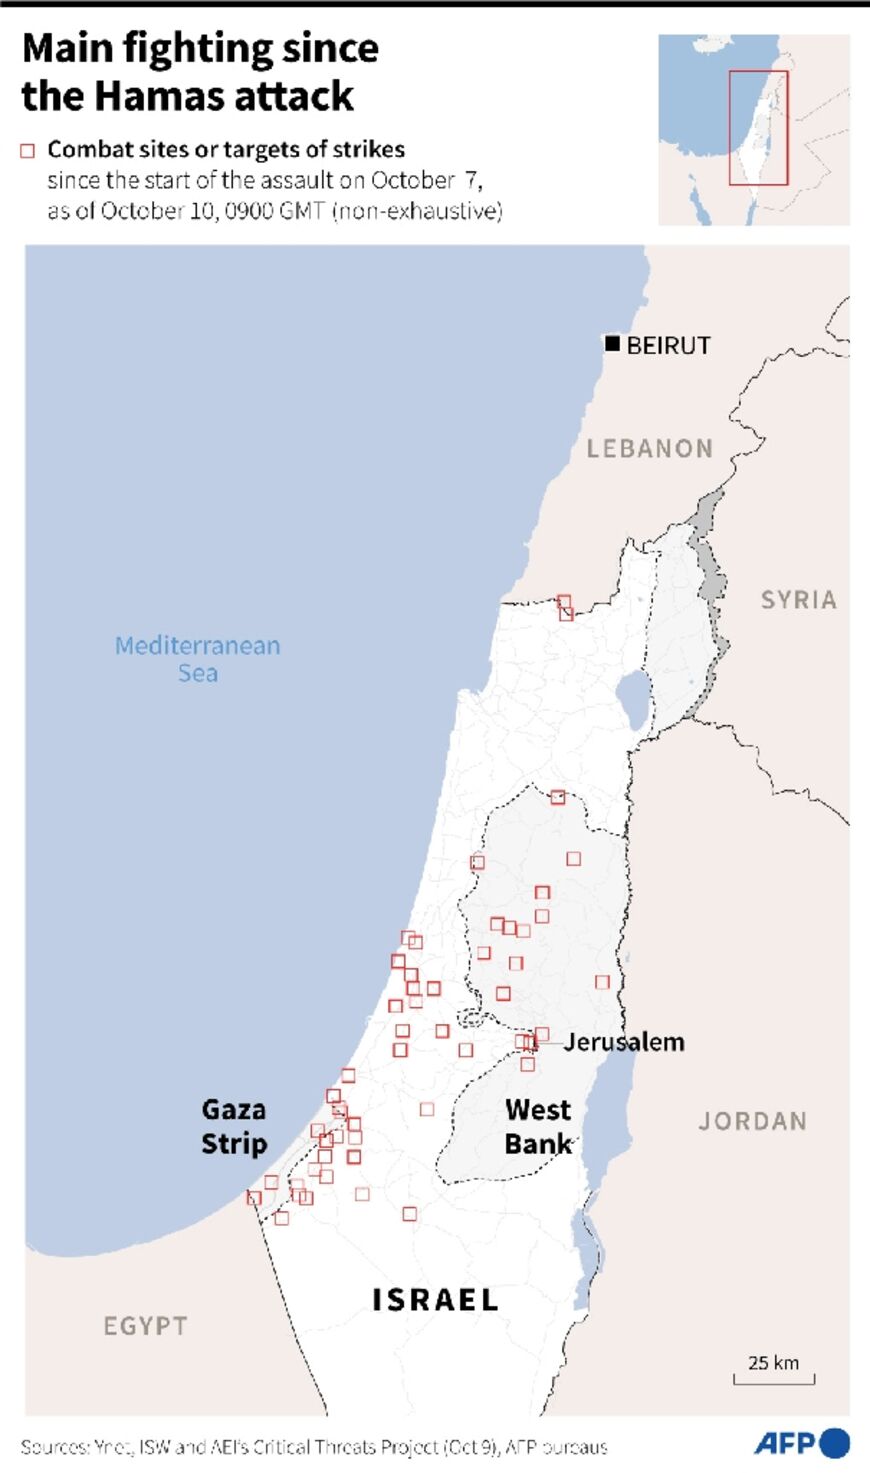 Main fighting since start of the Hamas attack